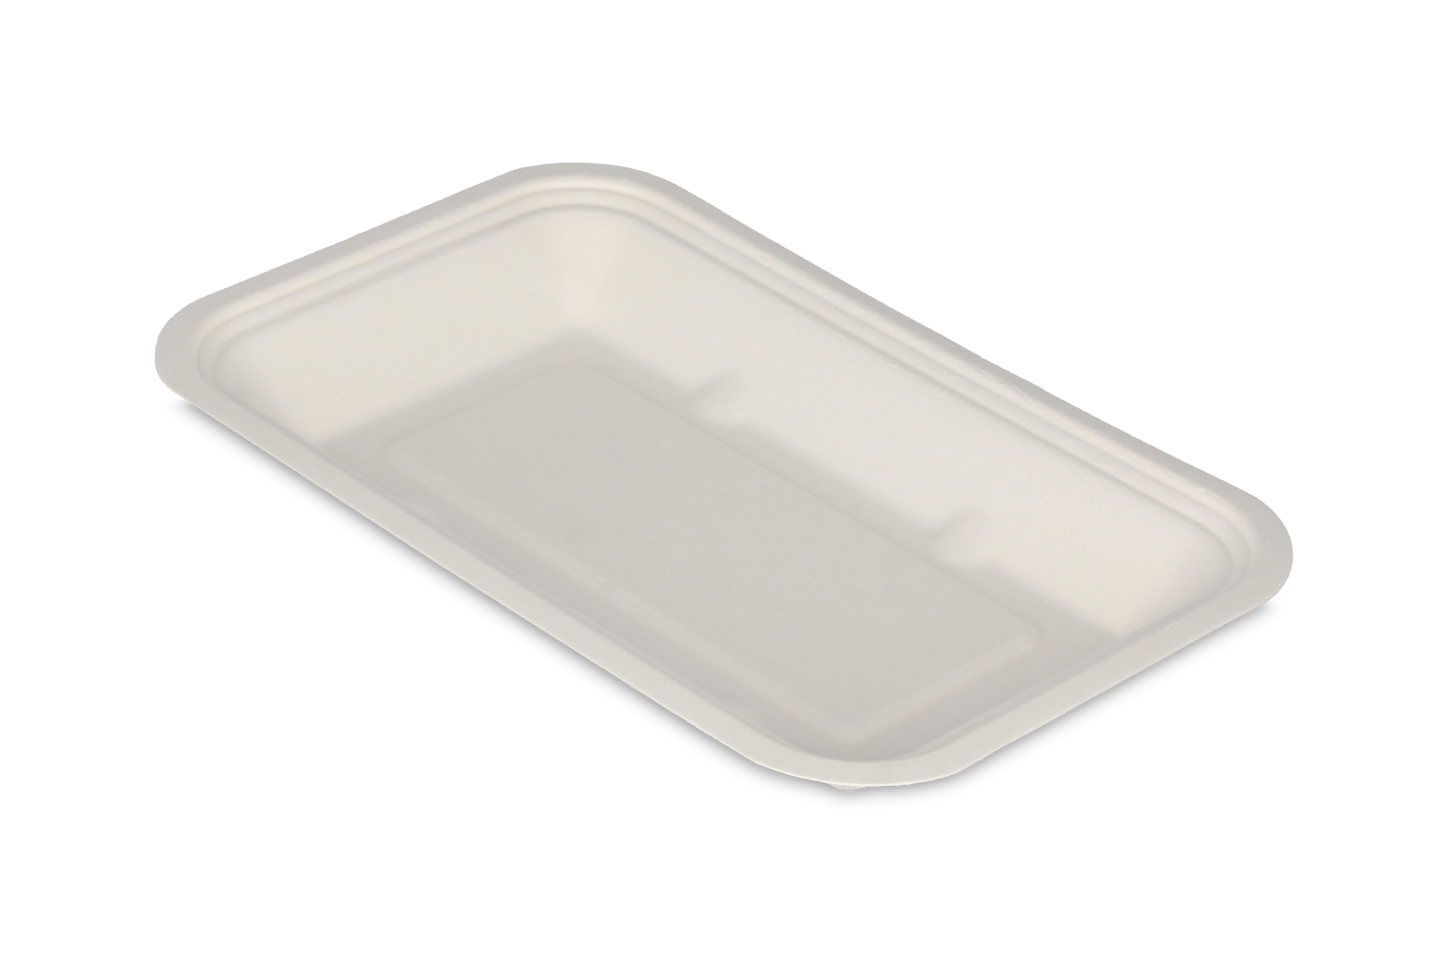 Snacktray Bagasse A2 (188 * 120 * 22 mm)